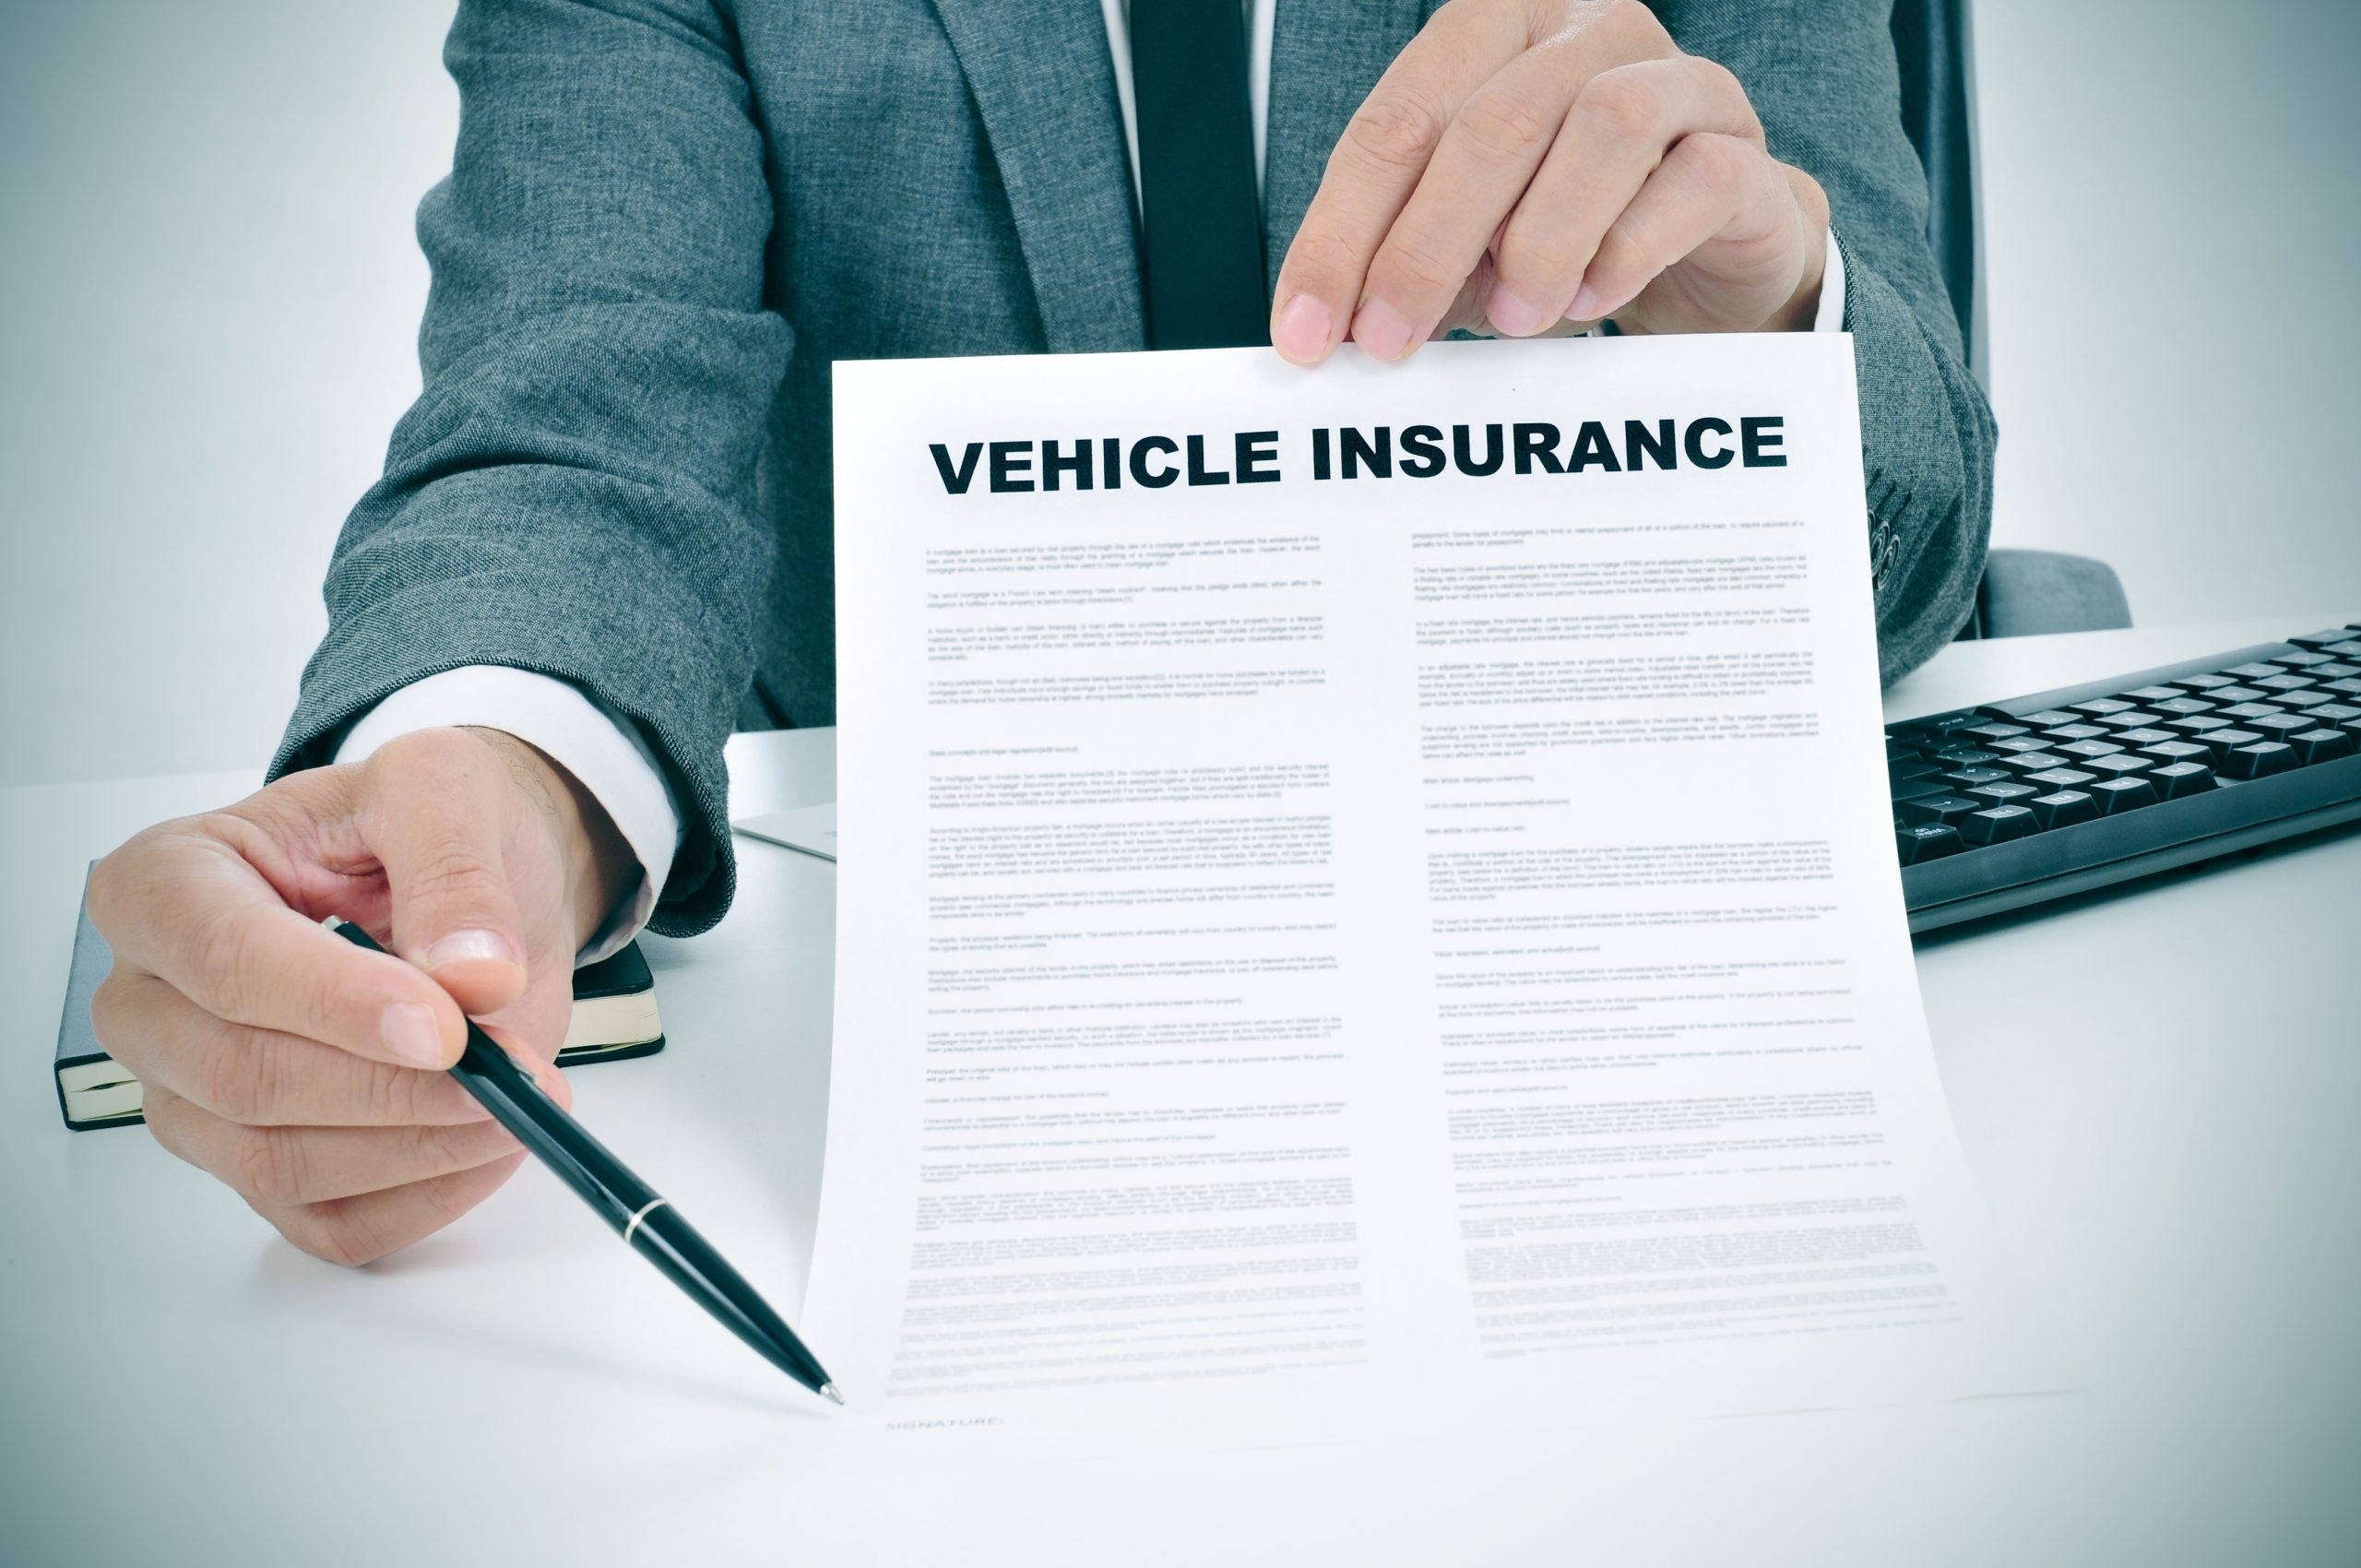 Car Insurance Premiums After a Car Accident